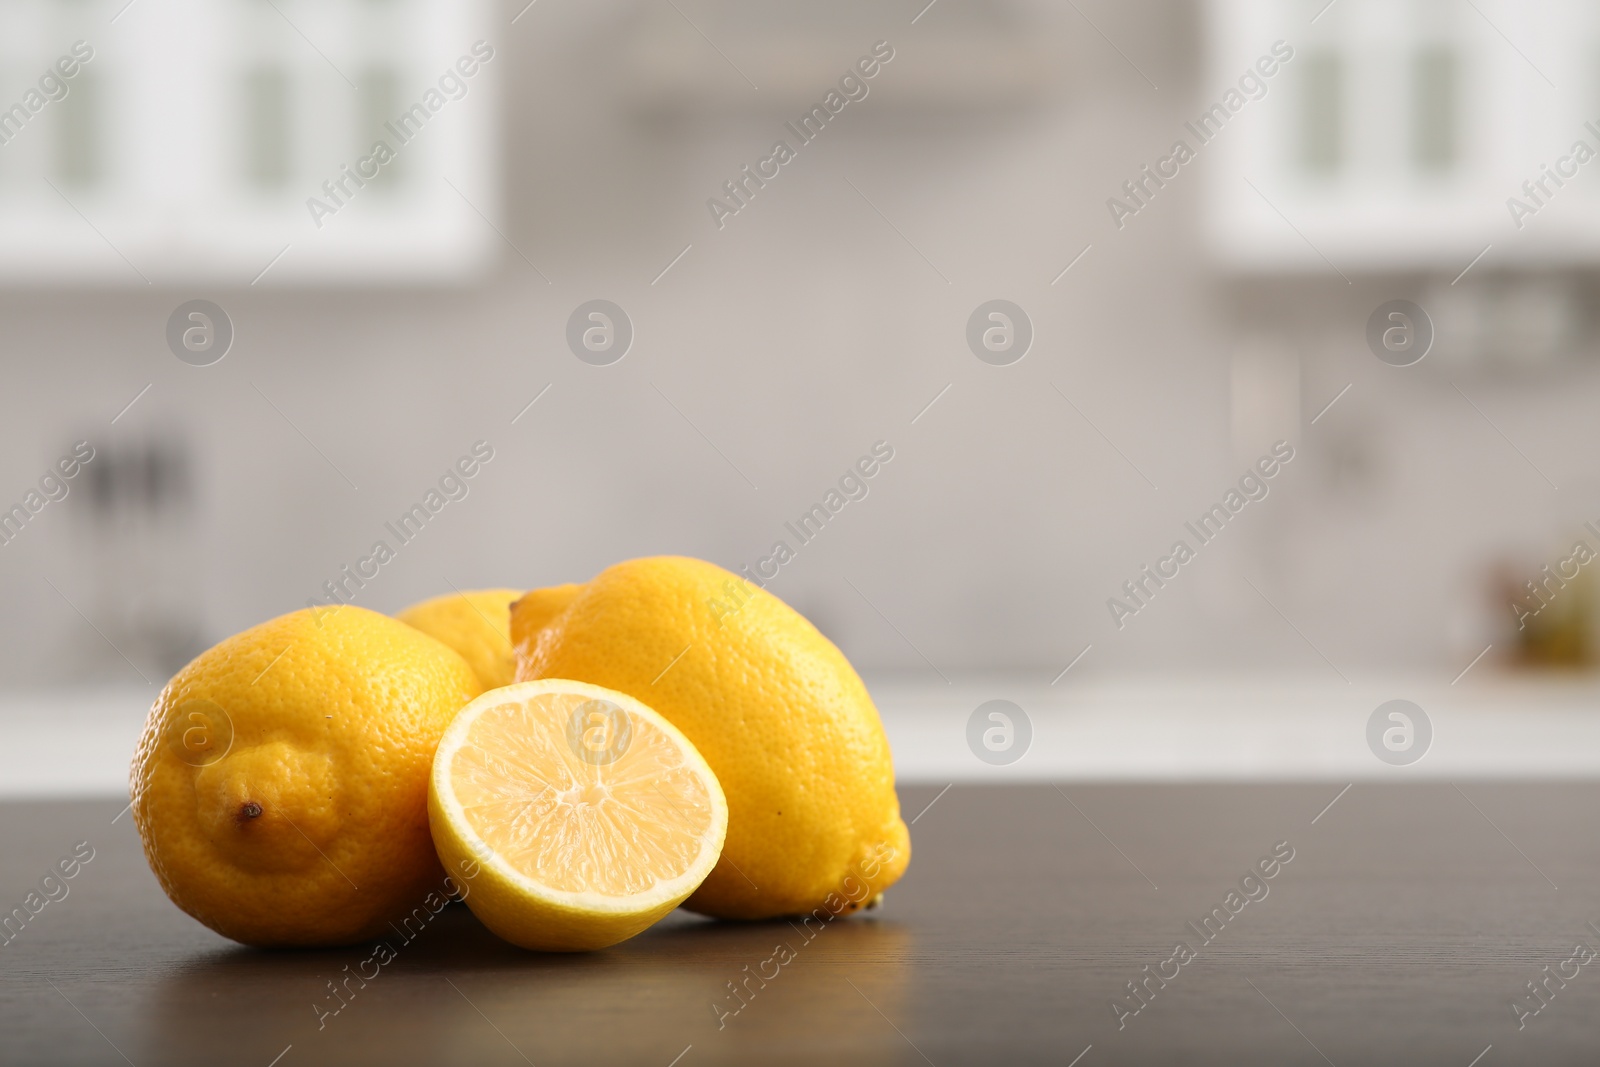 Photo of Whole and cut lemons on wooden counter in kitchen, space for text